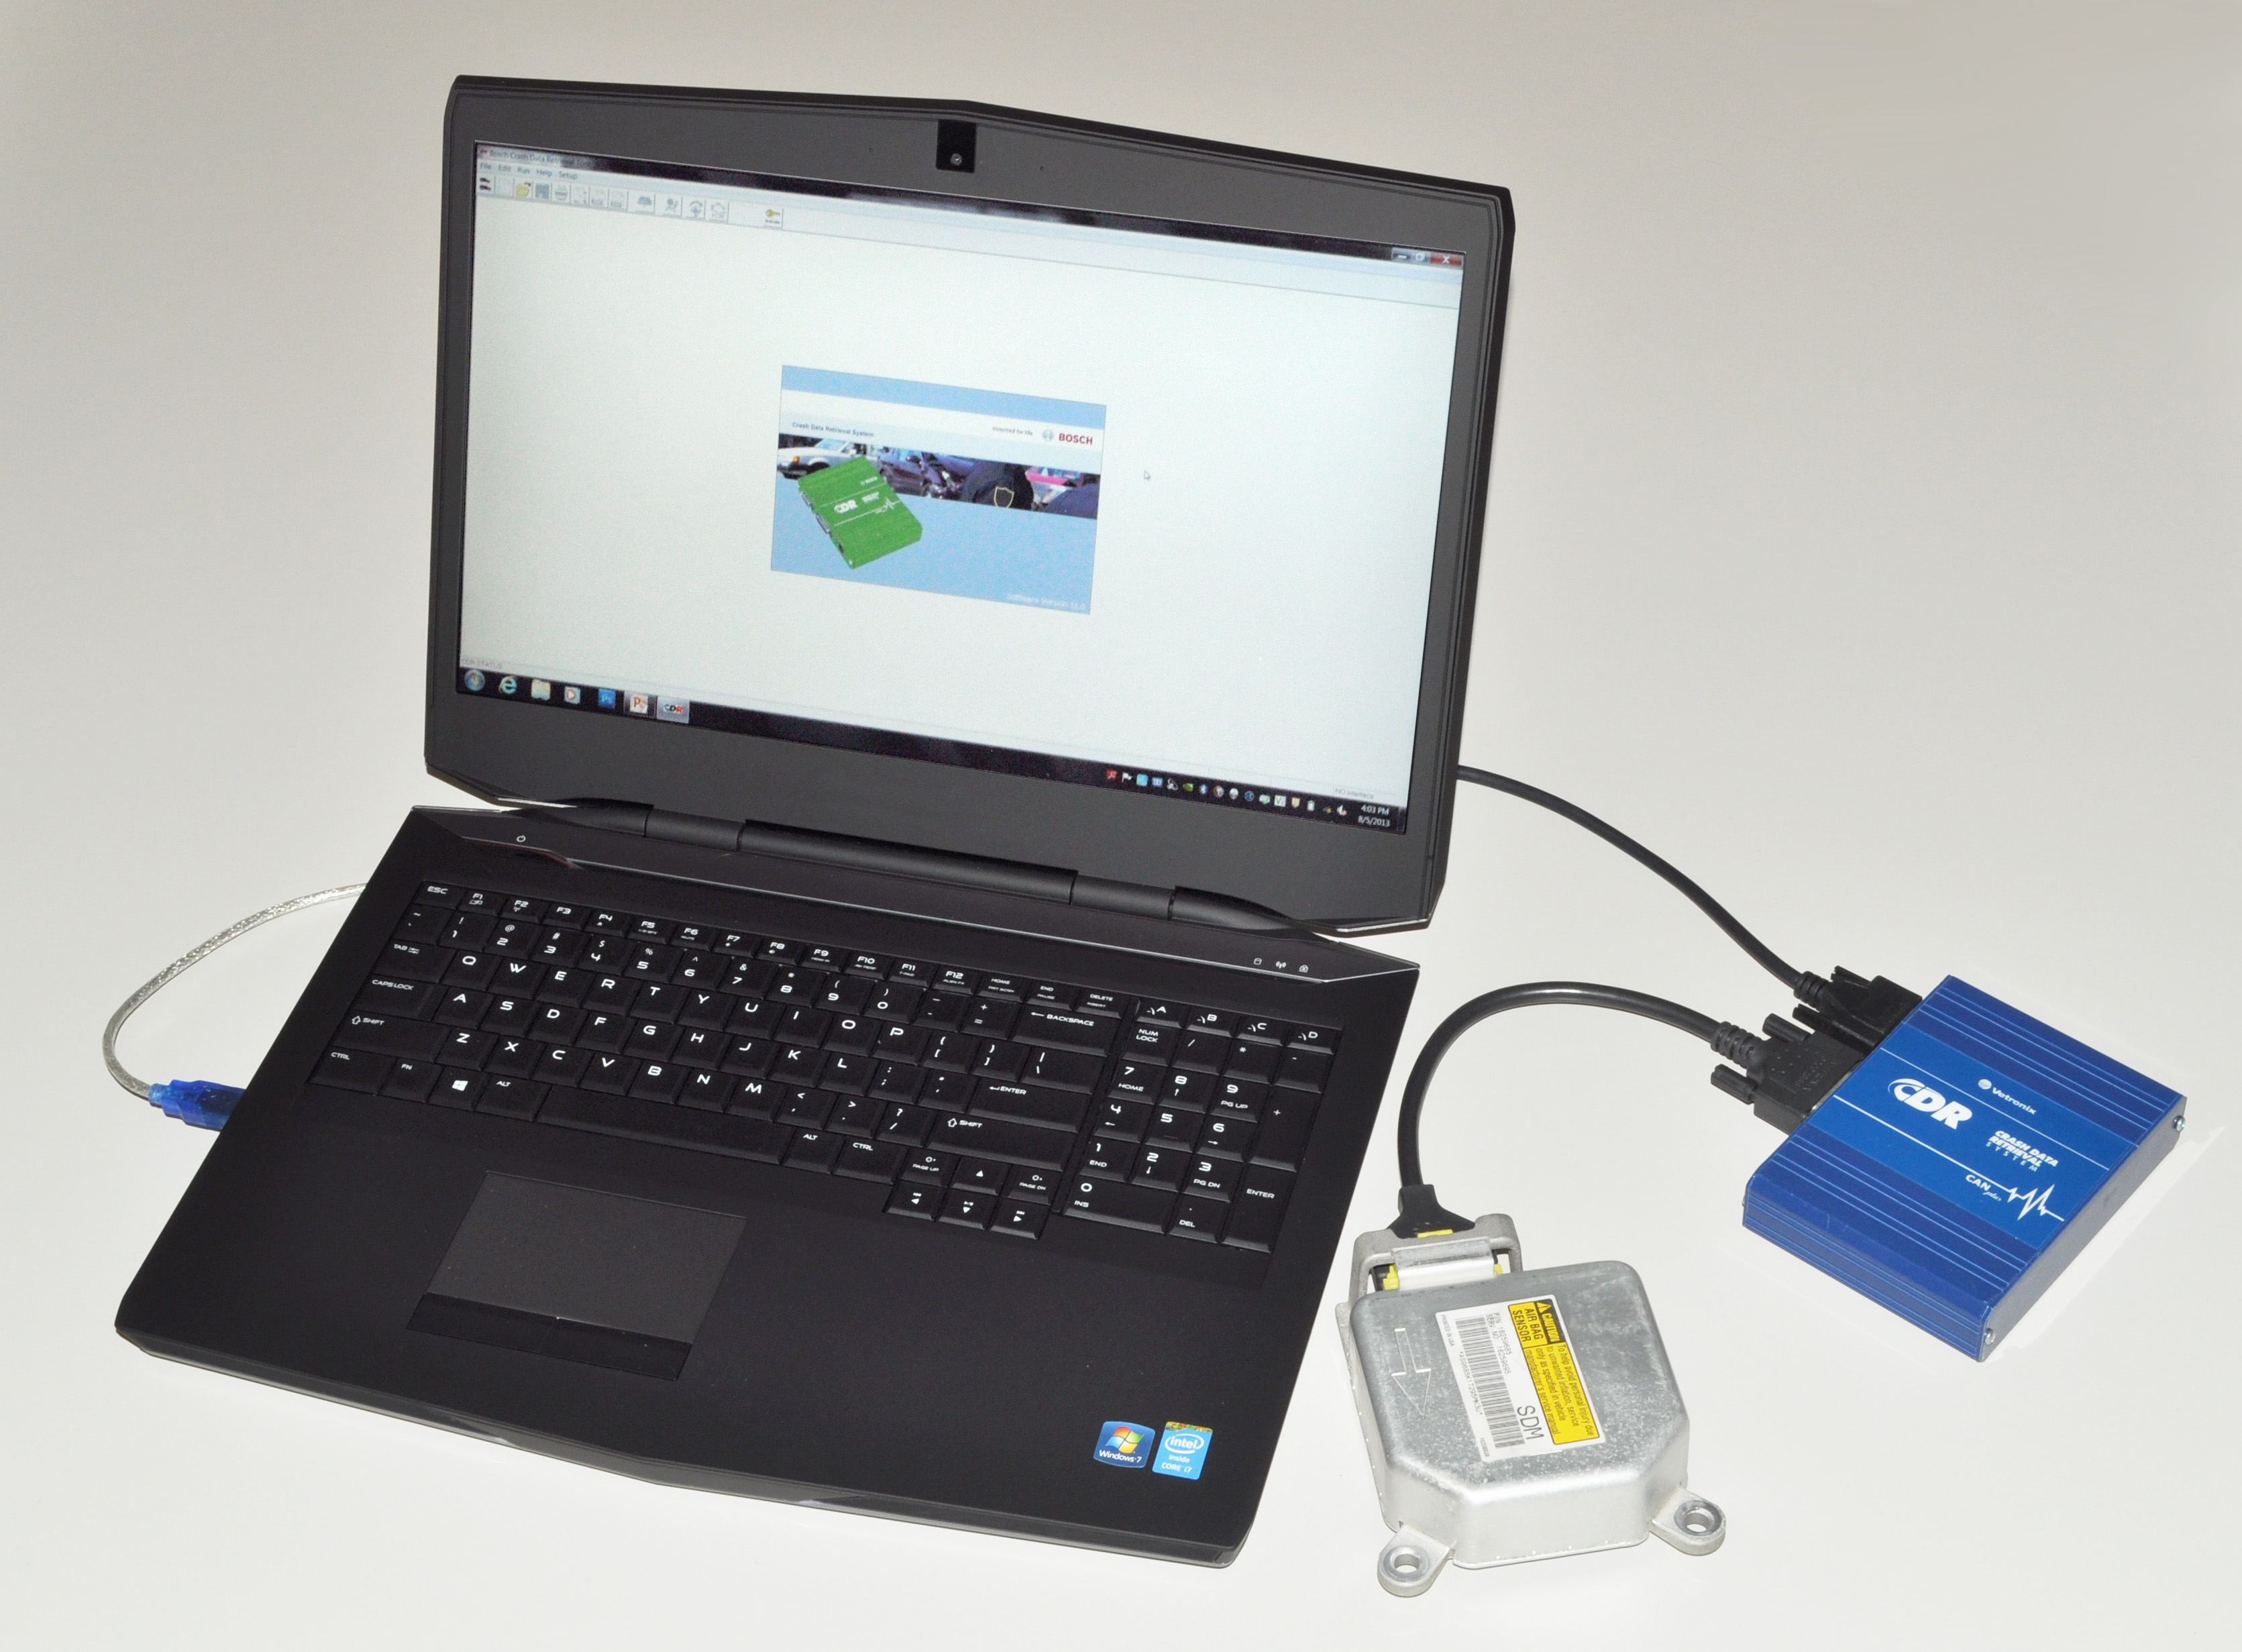 A laptop connected to an external device